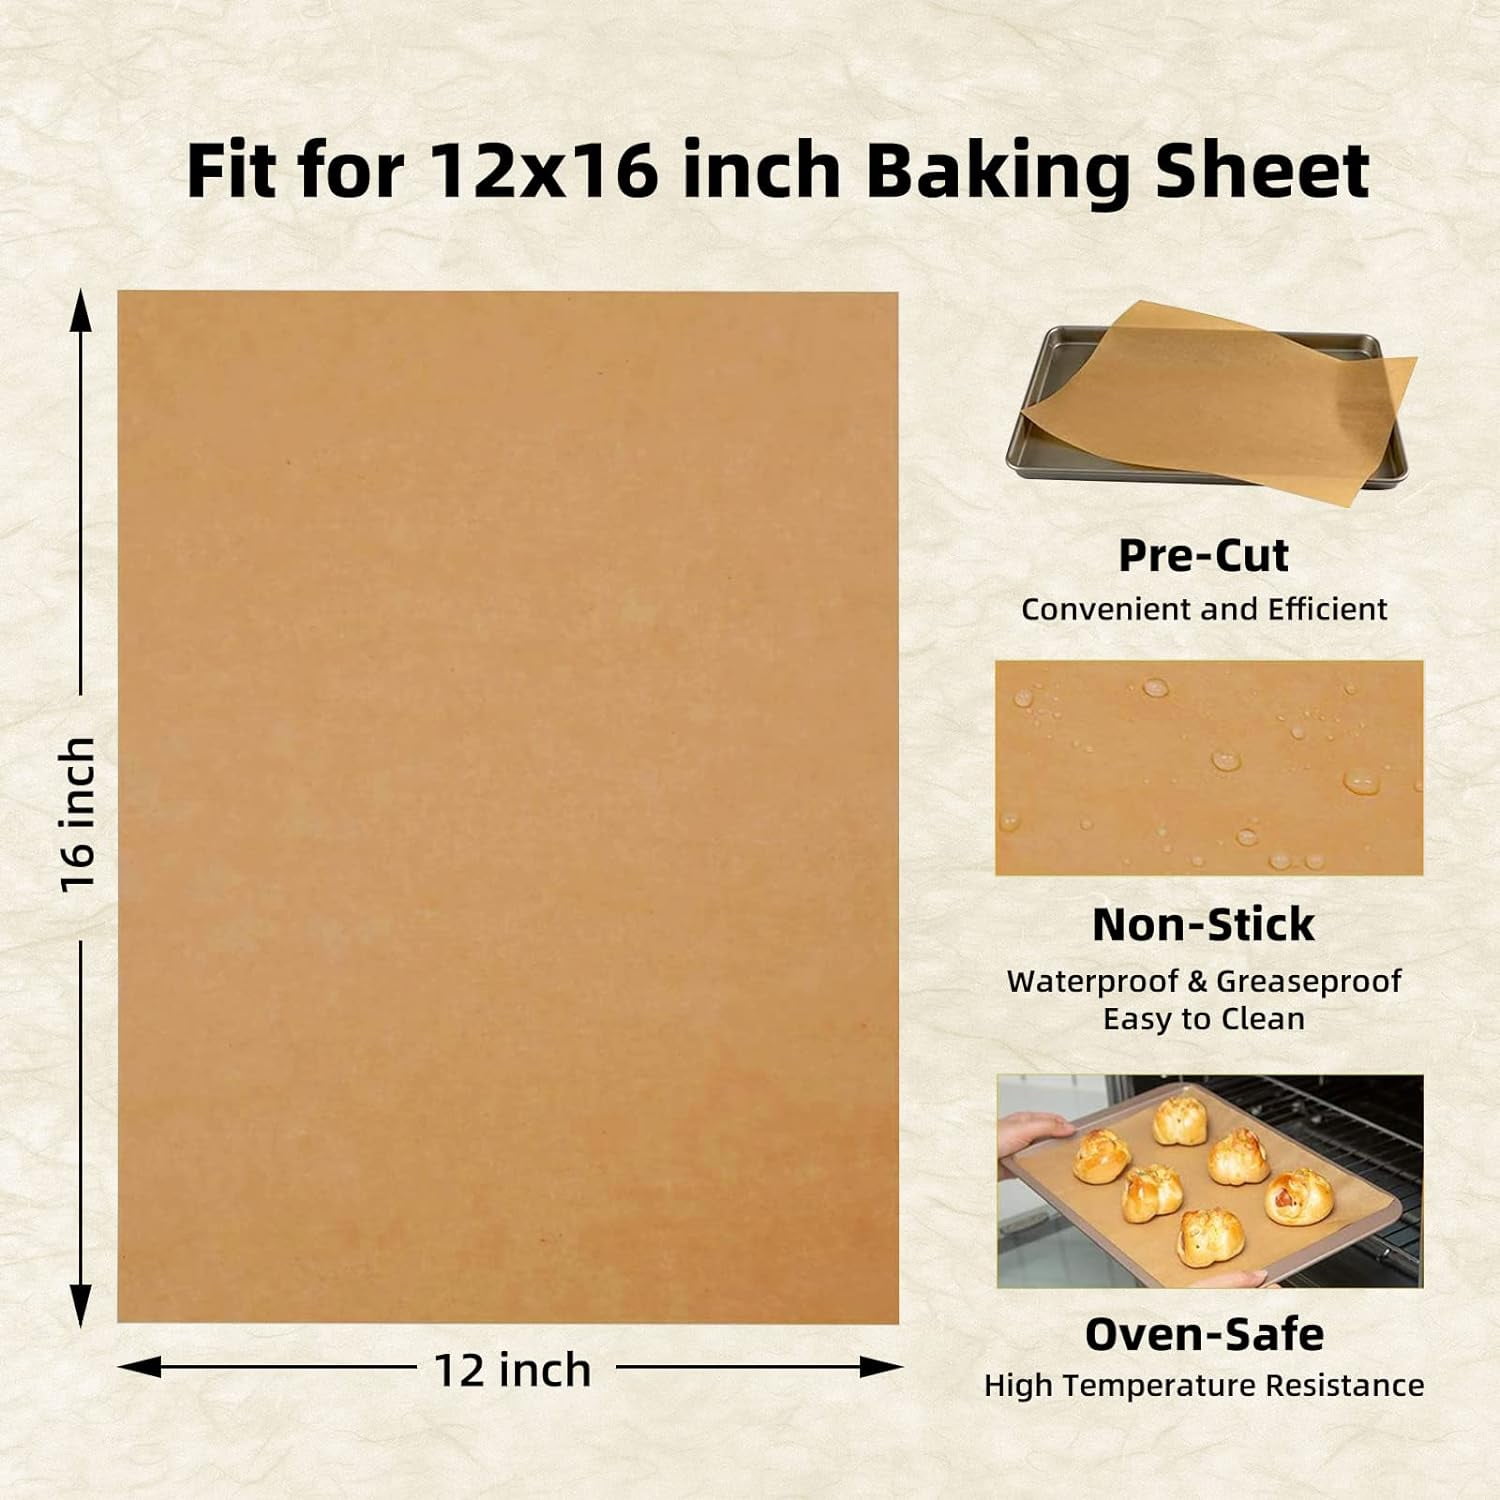 Katbtie Unbleached Parchment Paper Roll with Slide Cutterfor Baking 12in x  262ft, 260 Sq.Ft,Brown